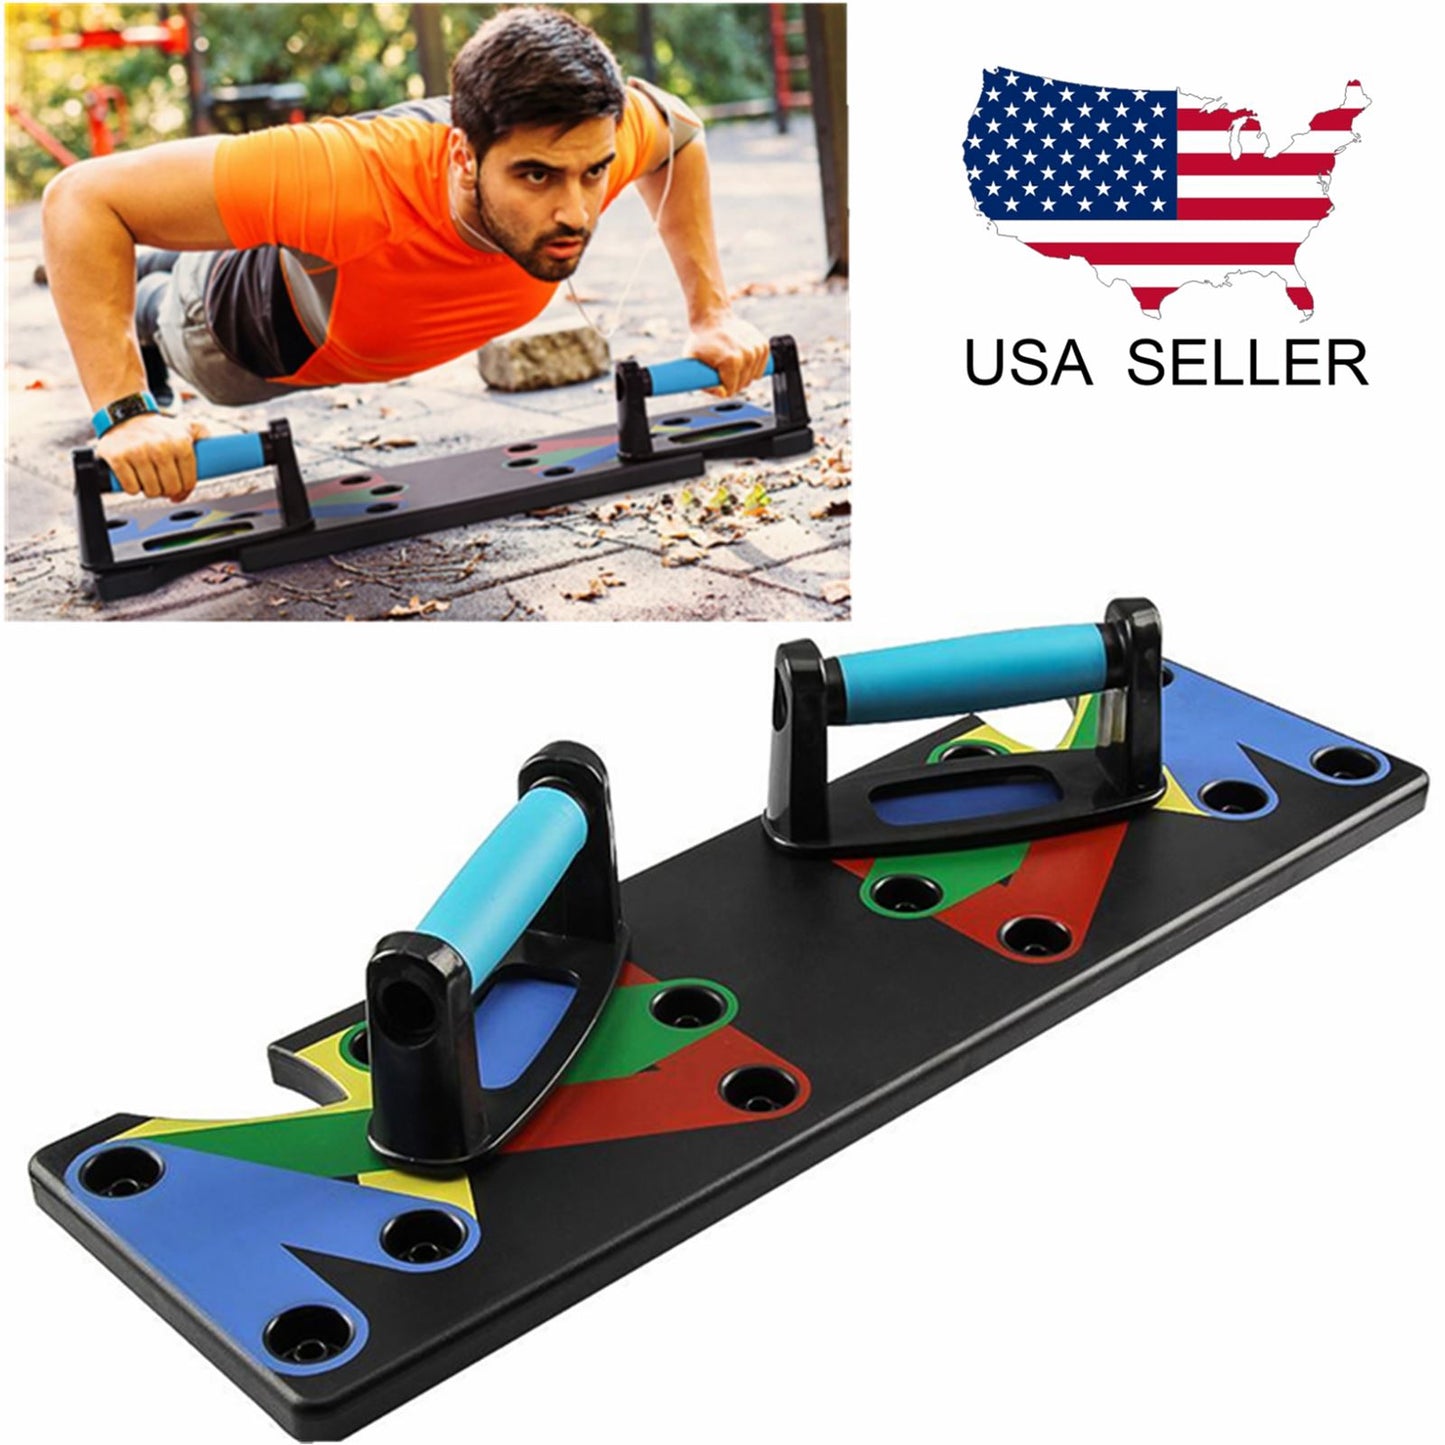 9 In 1 Body Building Push Up Rack Board System Fitness Workout Gym Push Up Stand Muscle Training Exercise Tool